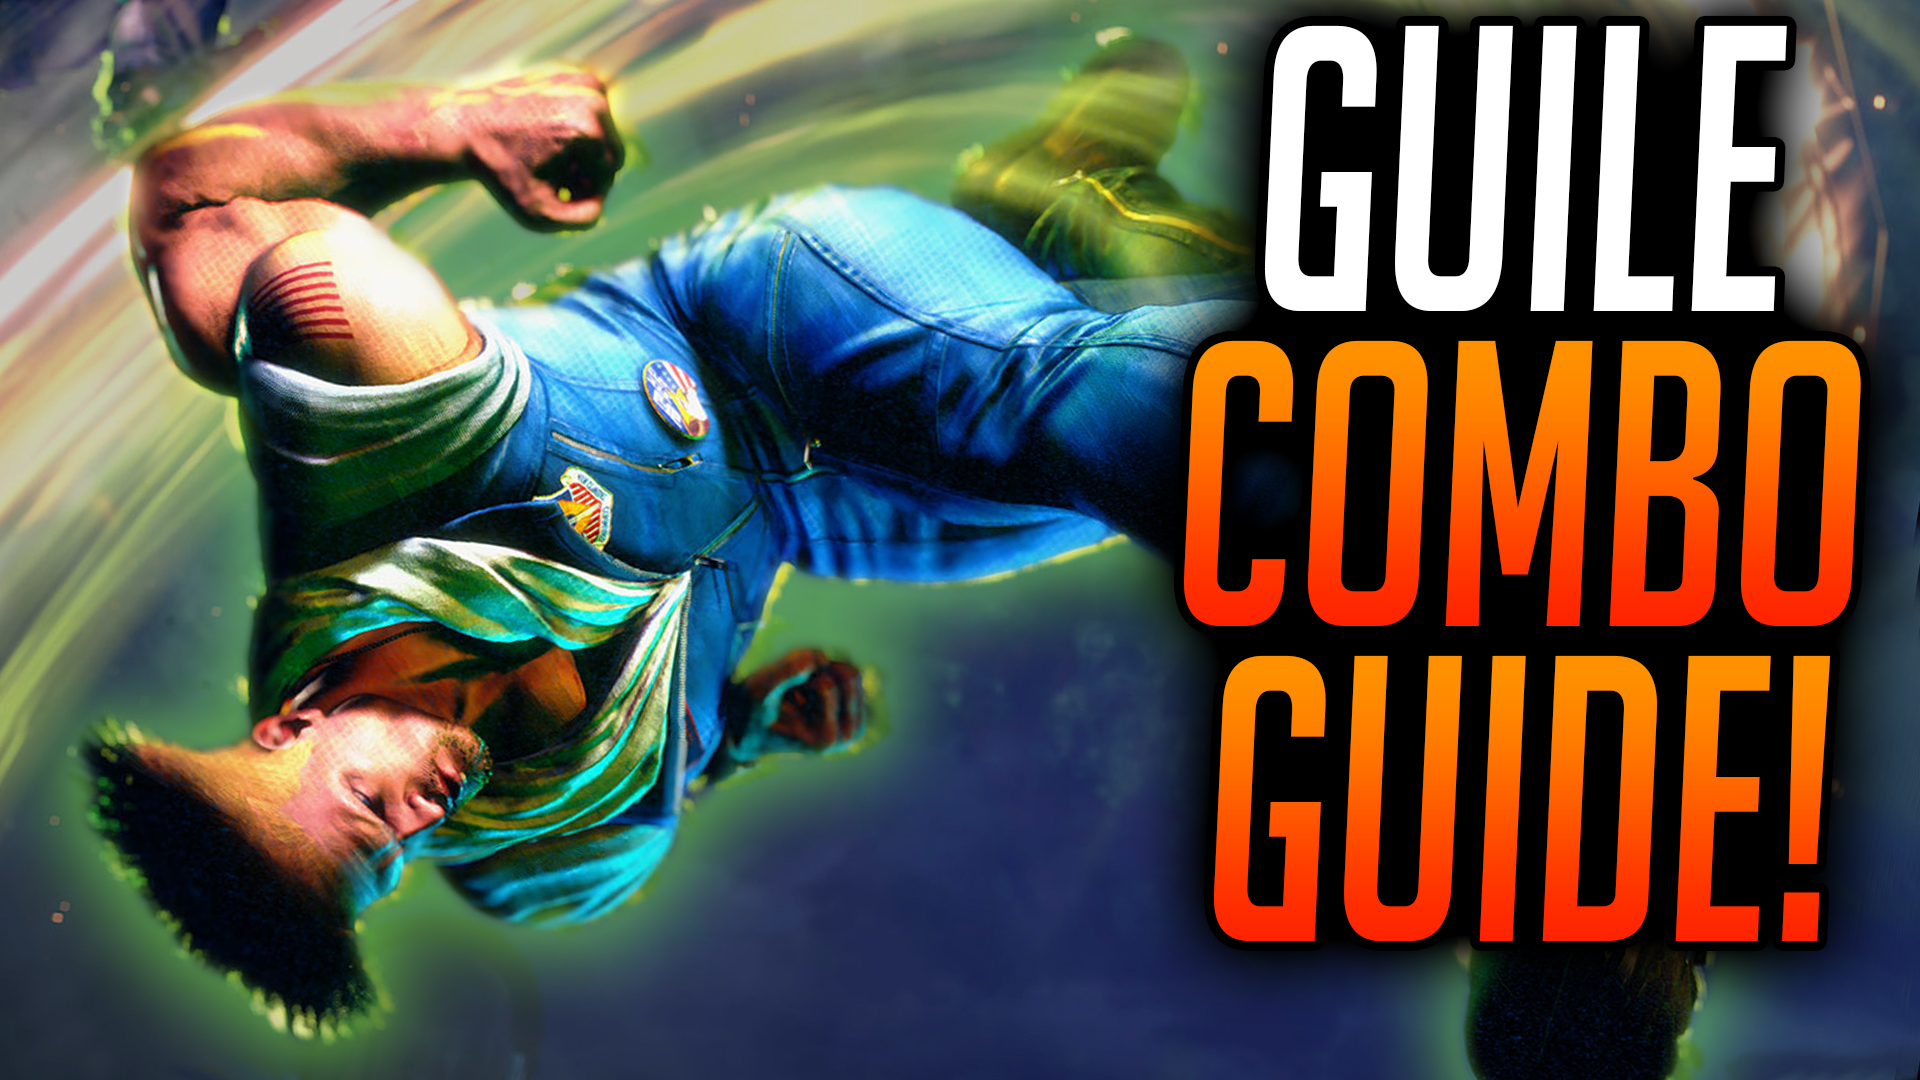 GUILE COMMAND LIST, STREET FIGHTER 6